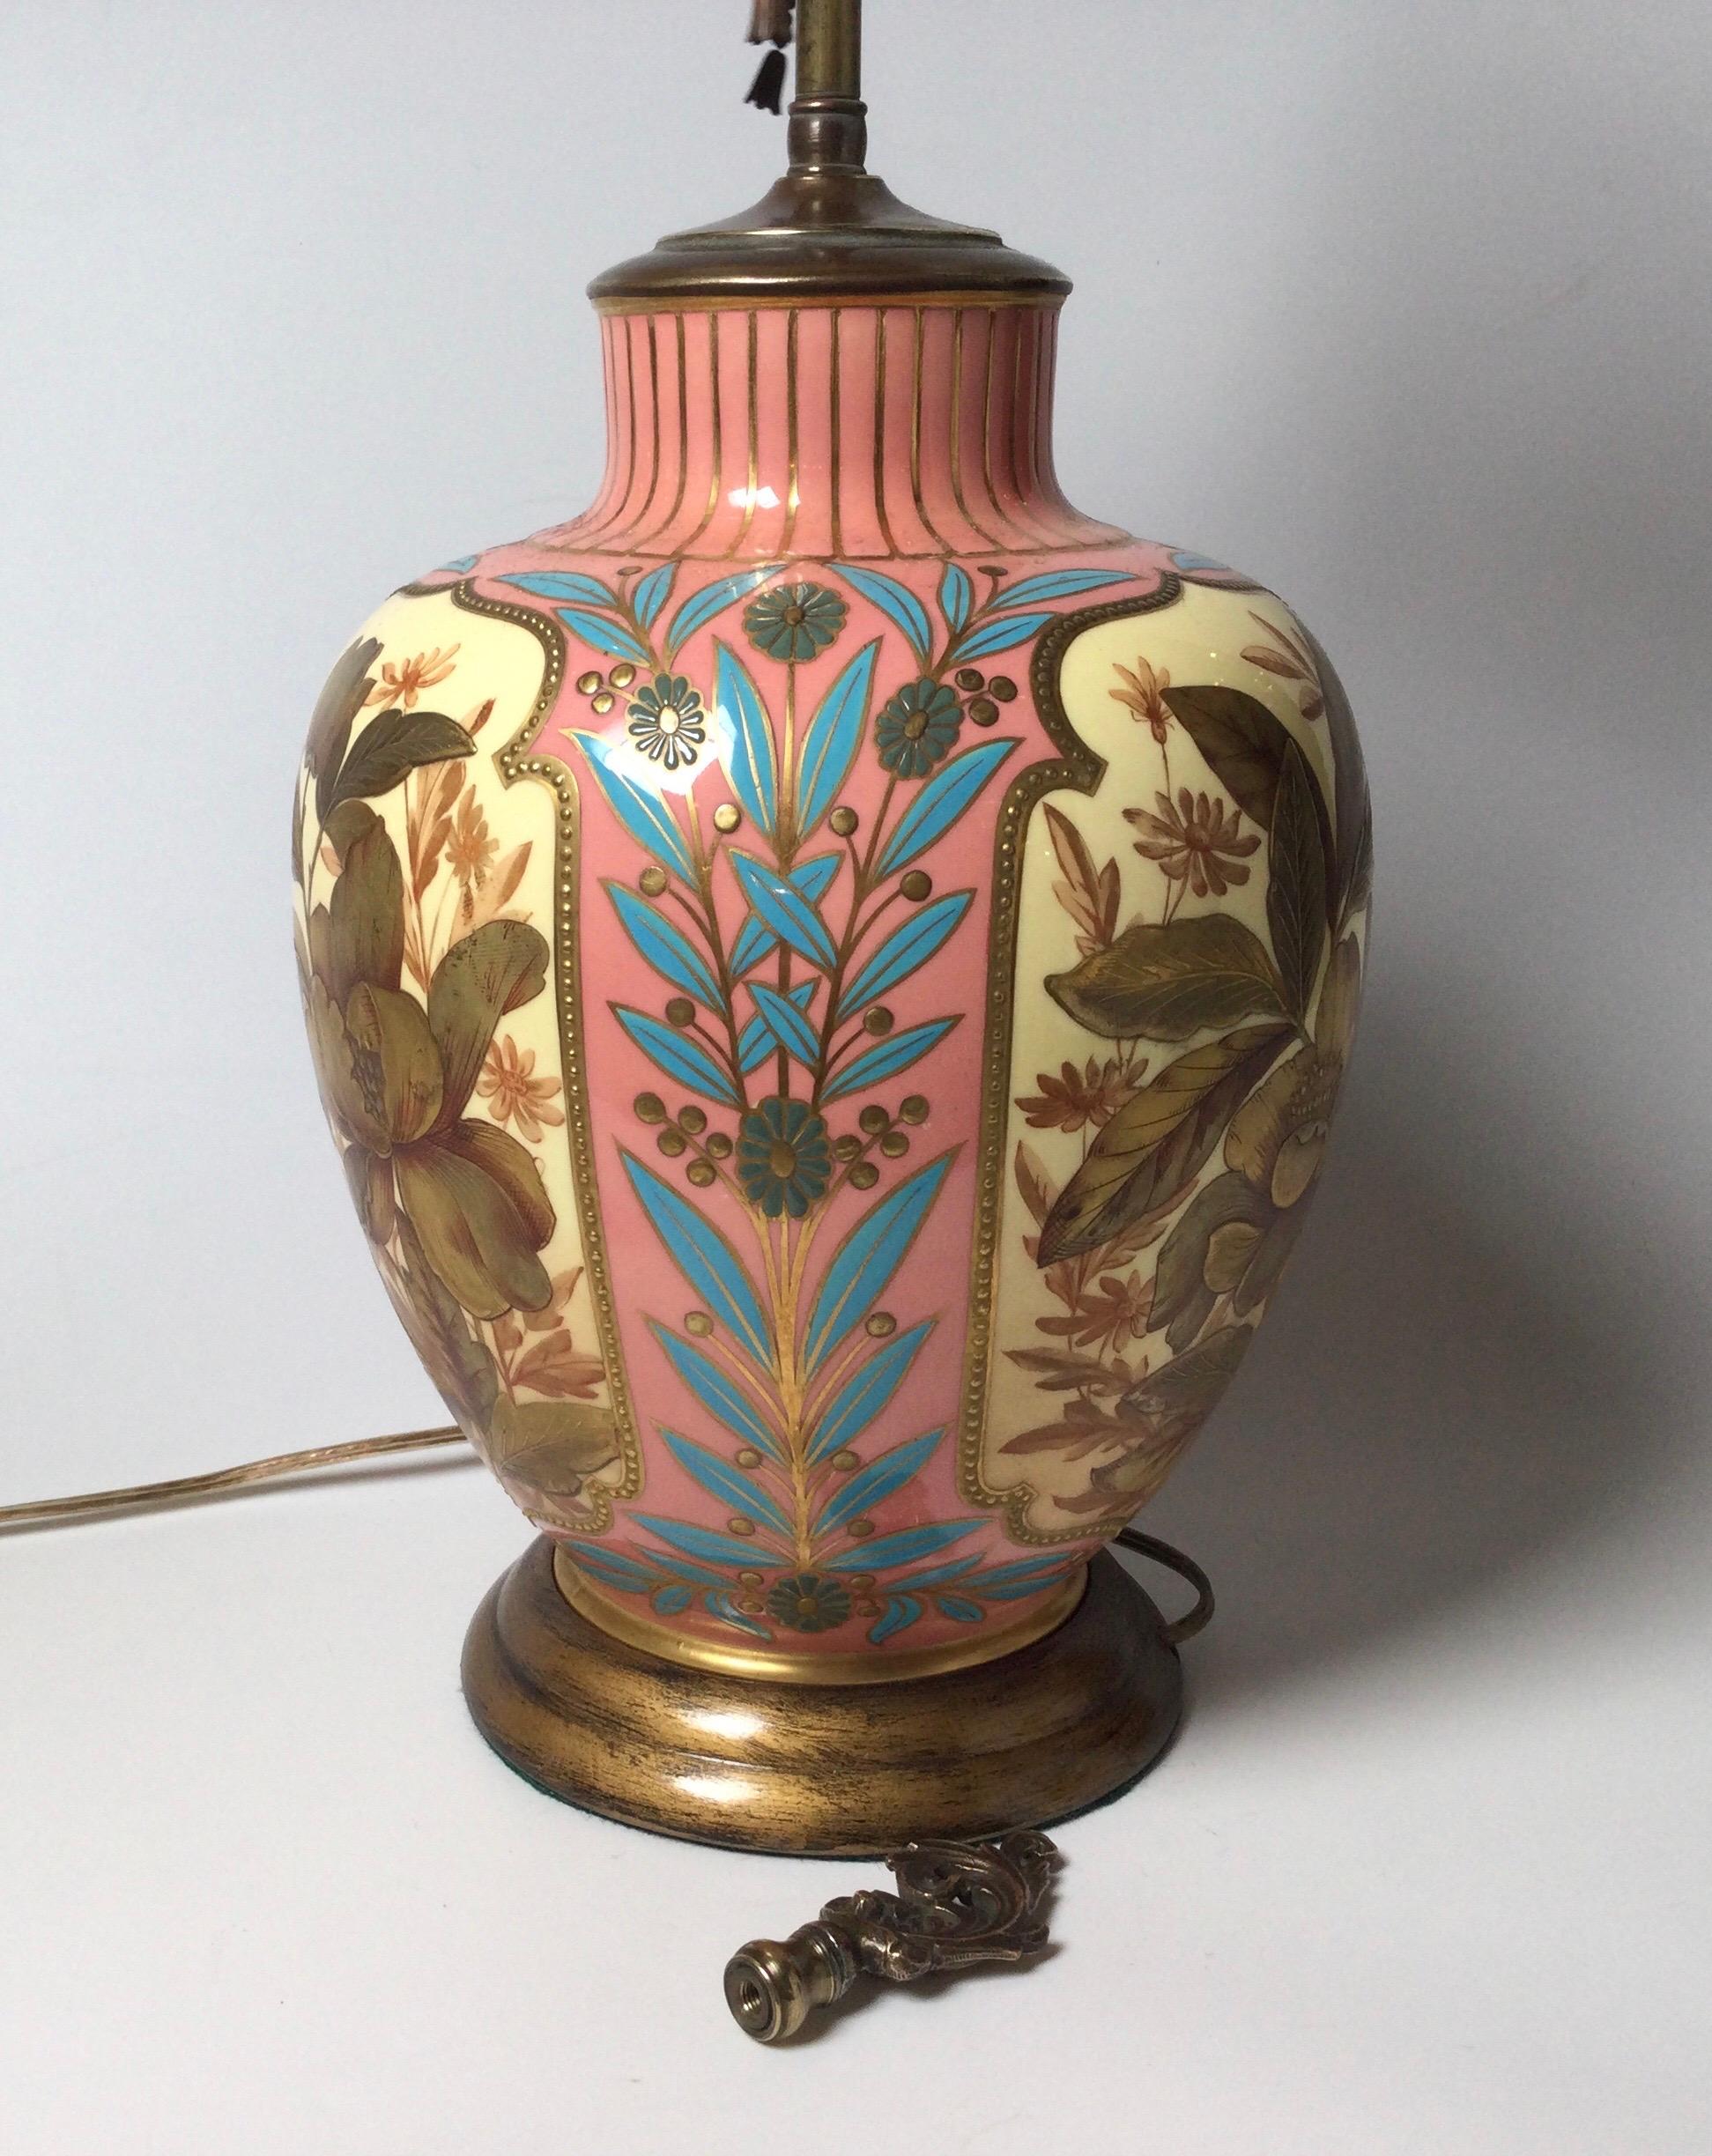 Elegant Hand Gilt and Painted Porcelain Lamp by Royal Worcester, England 1878 In Excellent Condition For Sale In Lambertville, NJ